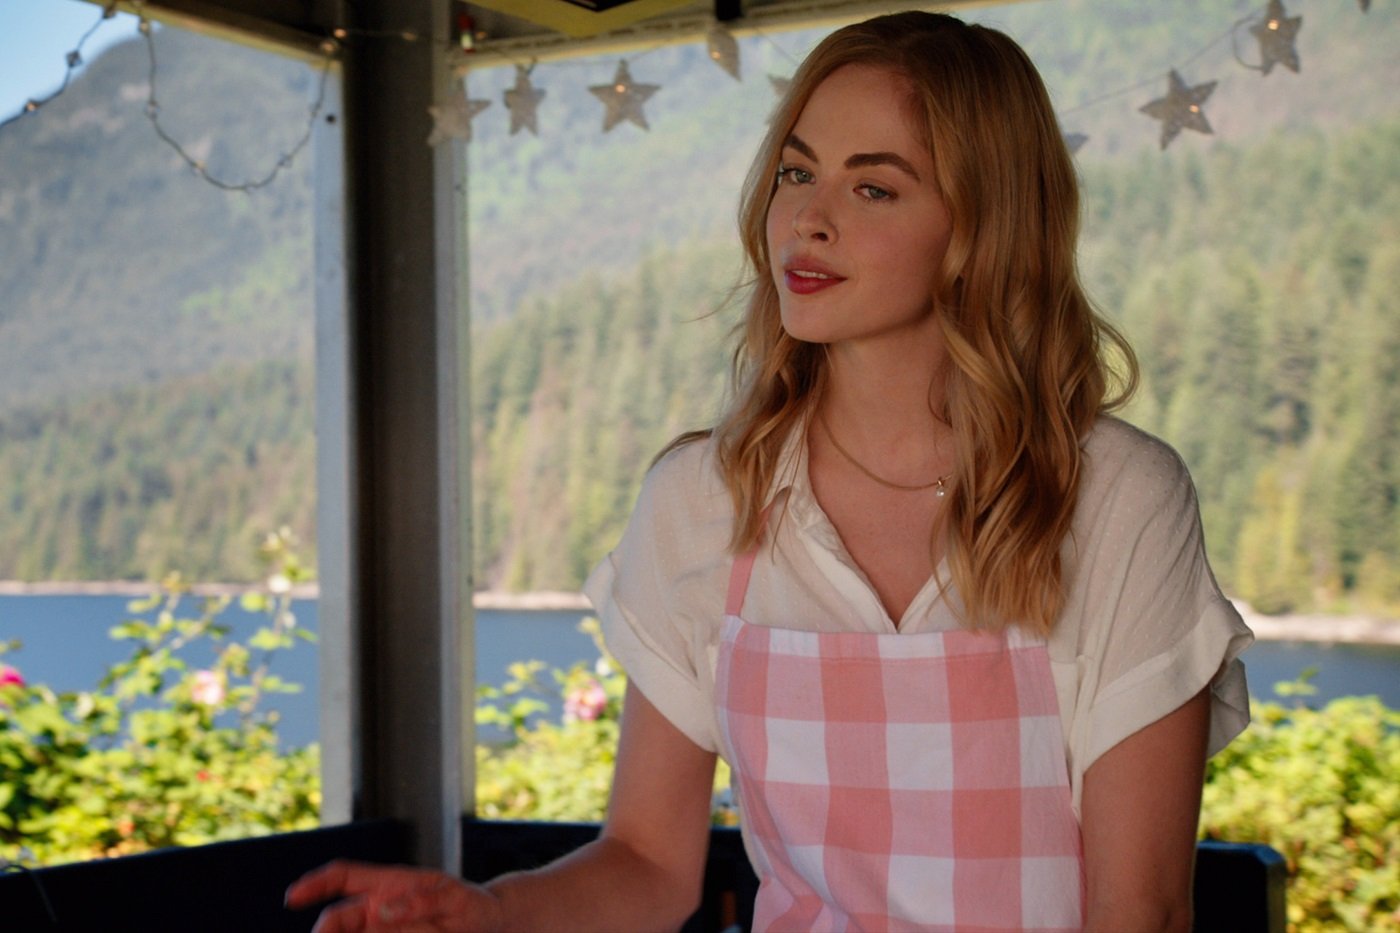 'Virgin River' actor Sarah Dugdale wearing a pink and white apron